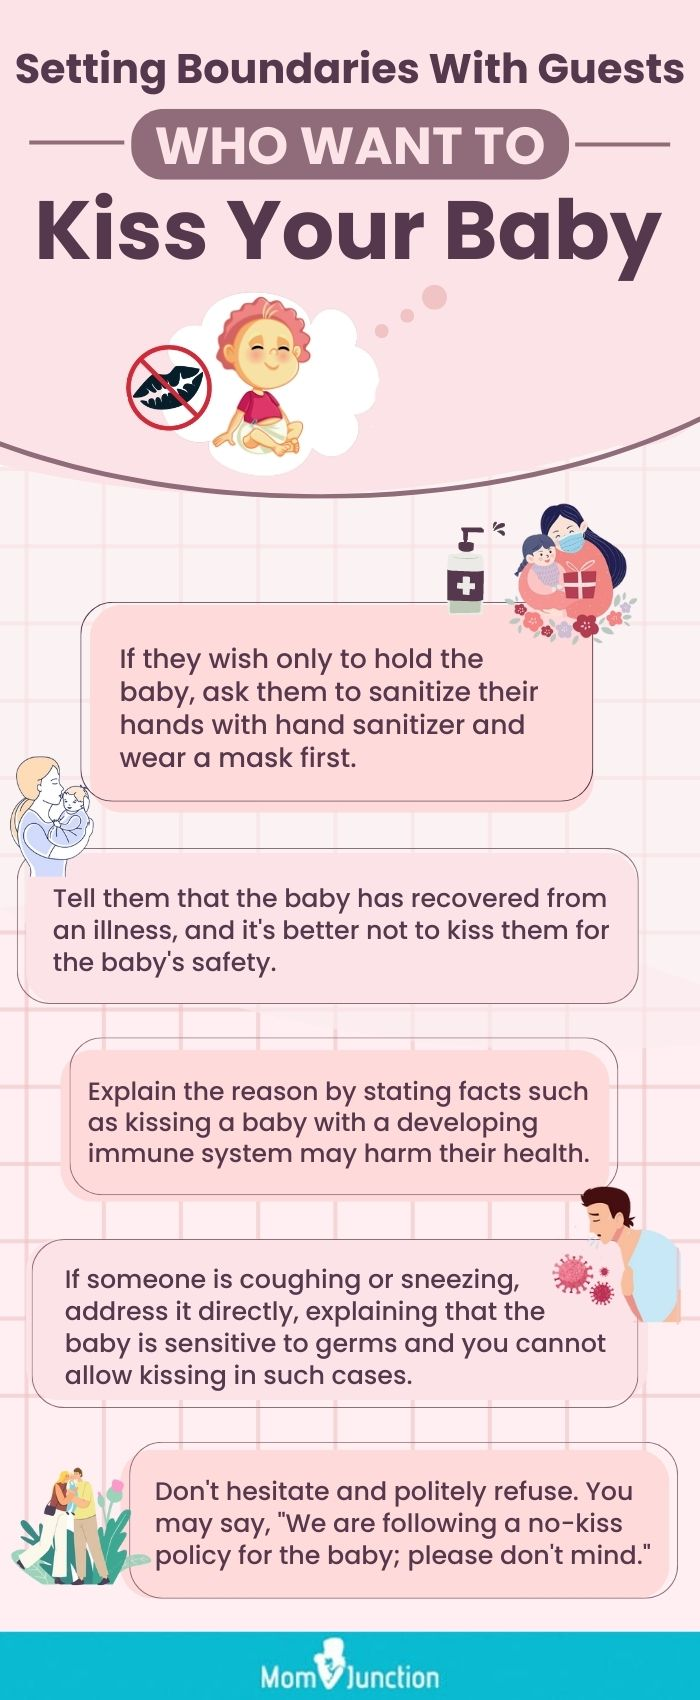 ways to politely refuse or stop someone from kissing your baby (infographic)